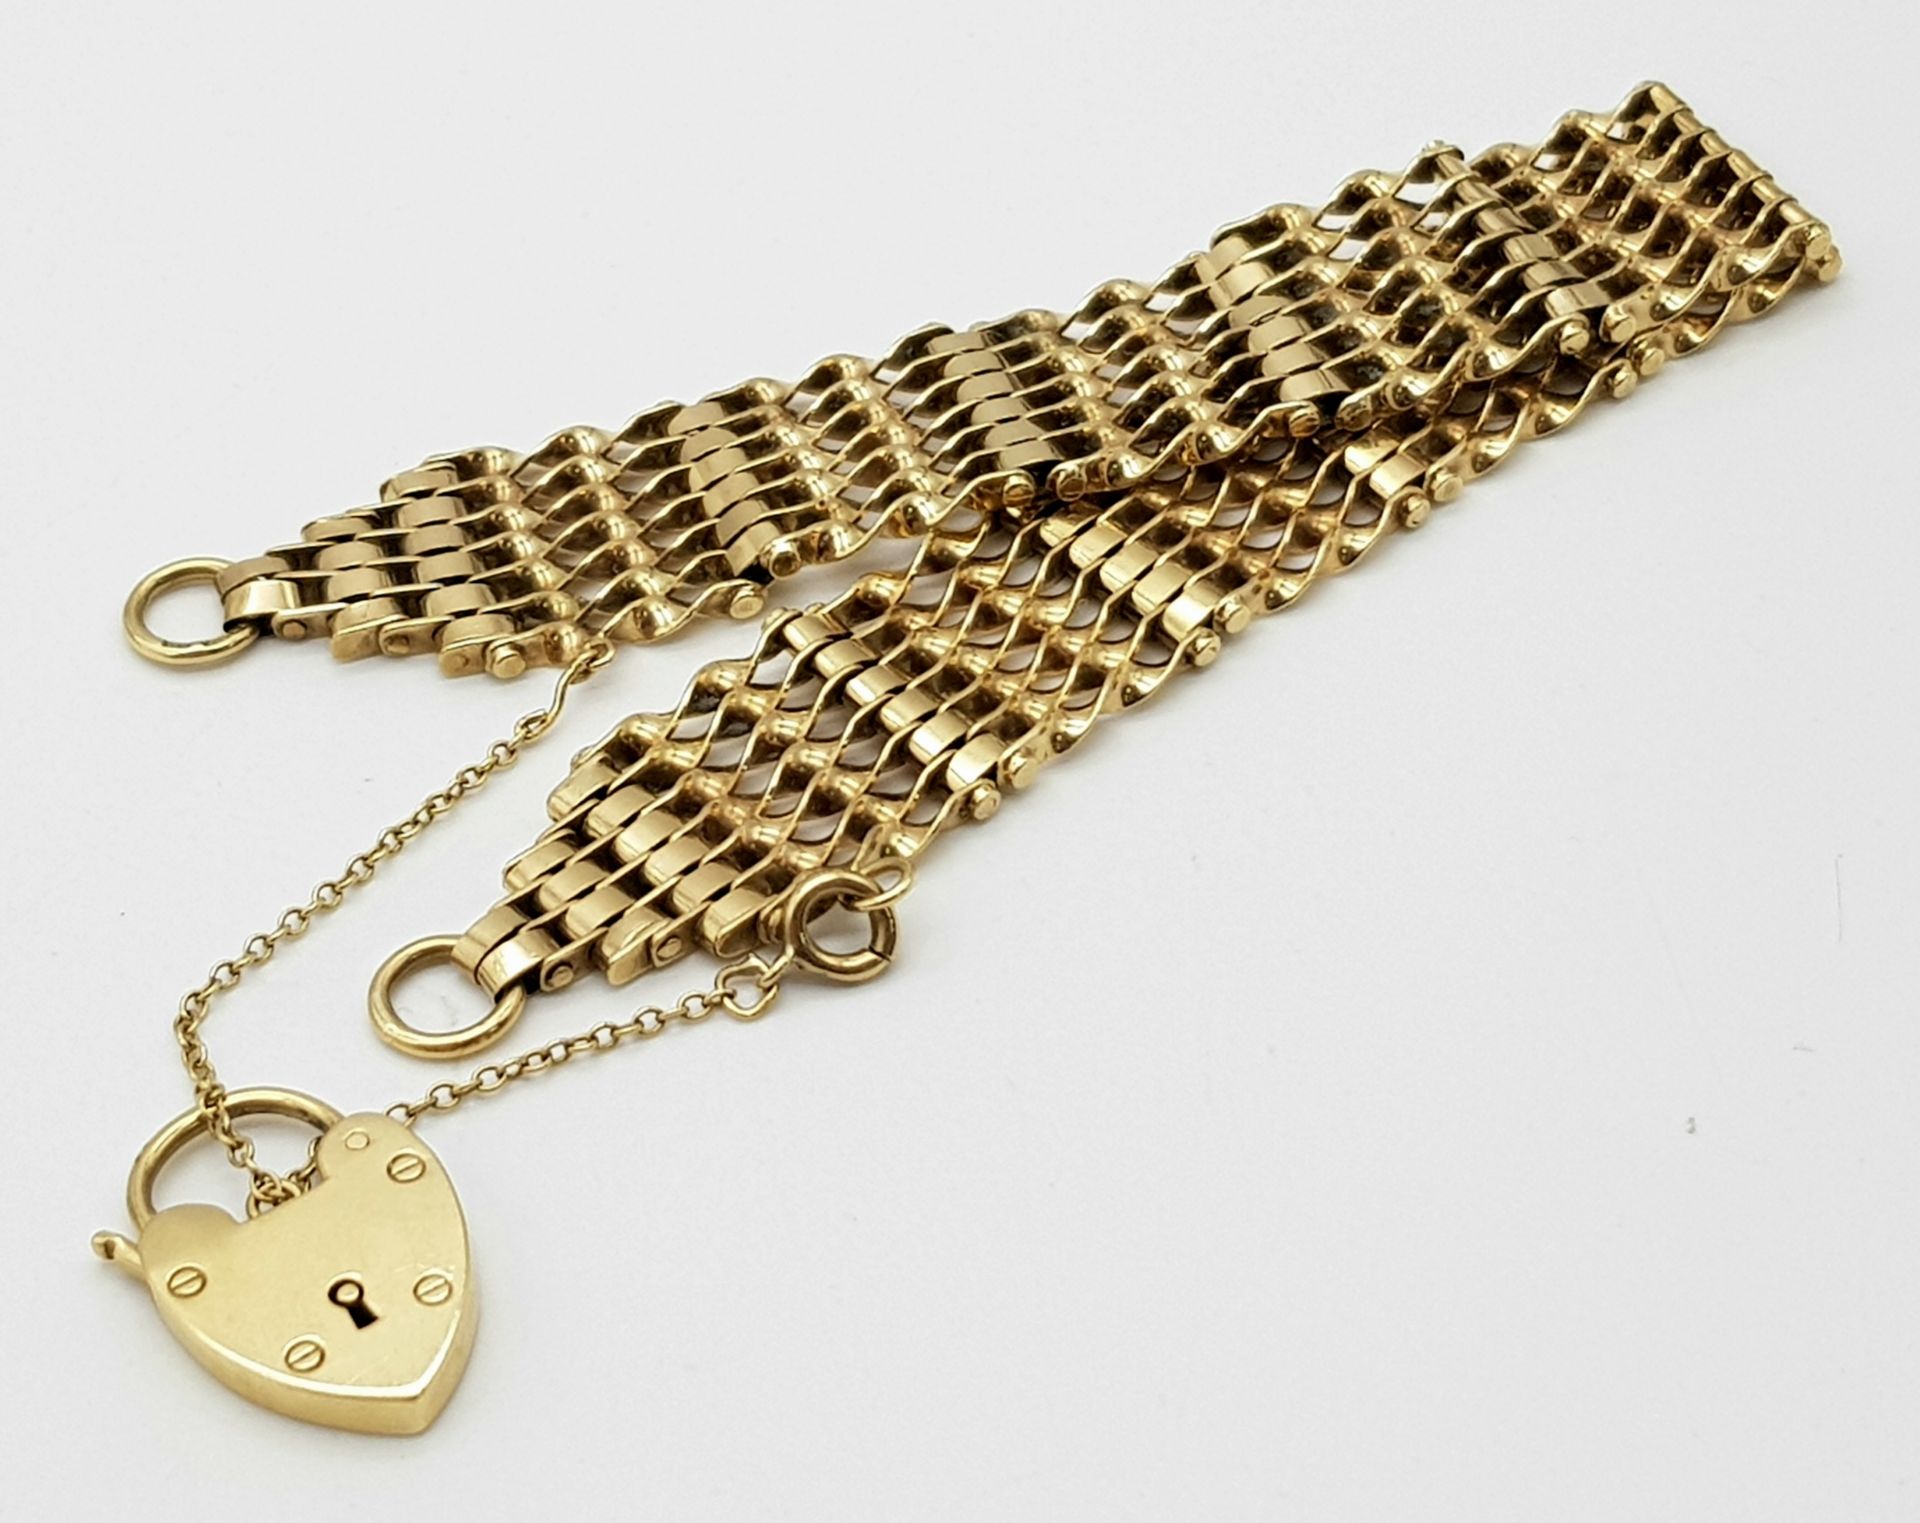 A 9K Yellow Gold gate Bracelet with Heart Clasp. 16mm width. 19.6g weight. - Image 6 of 6